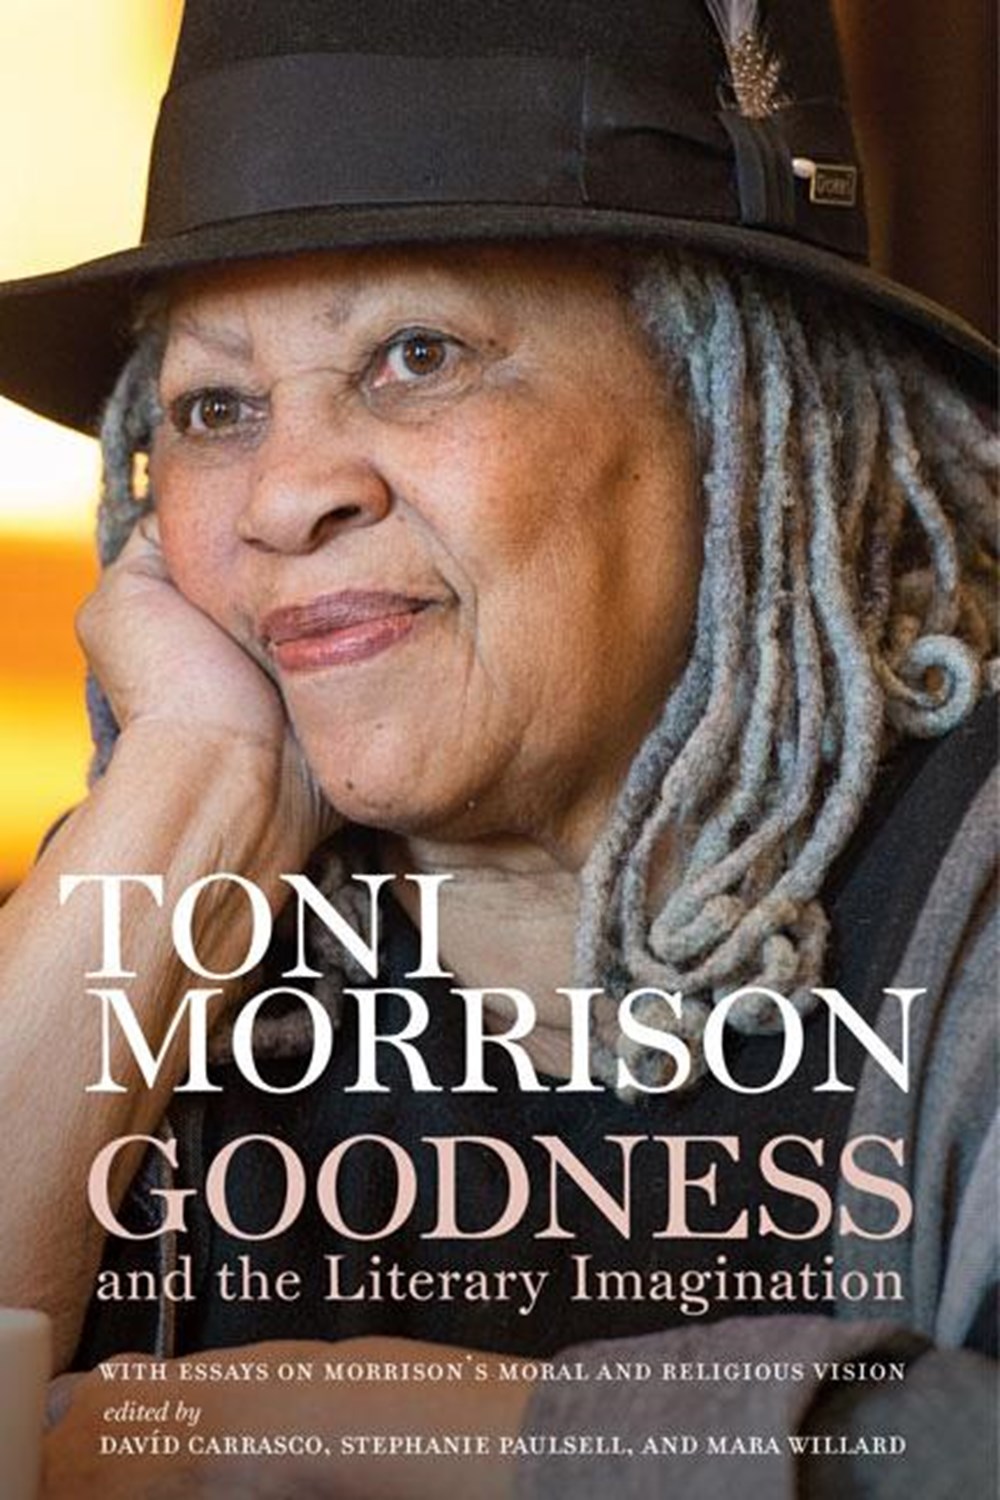 Goodness and the Literary Imagination: Harvard's 95th Ingersoll Lecture with Essays on Morrison's Mo